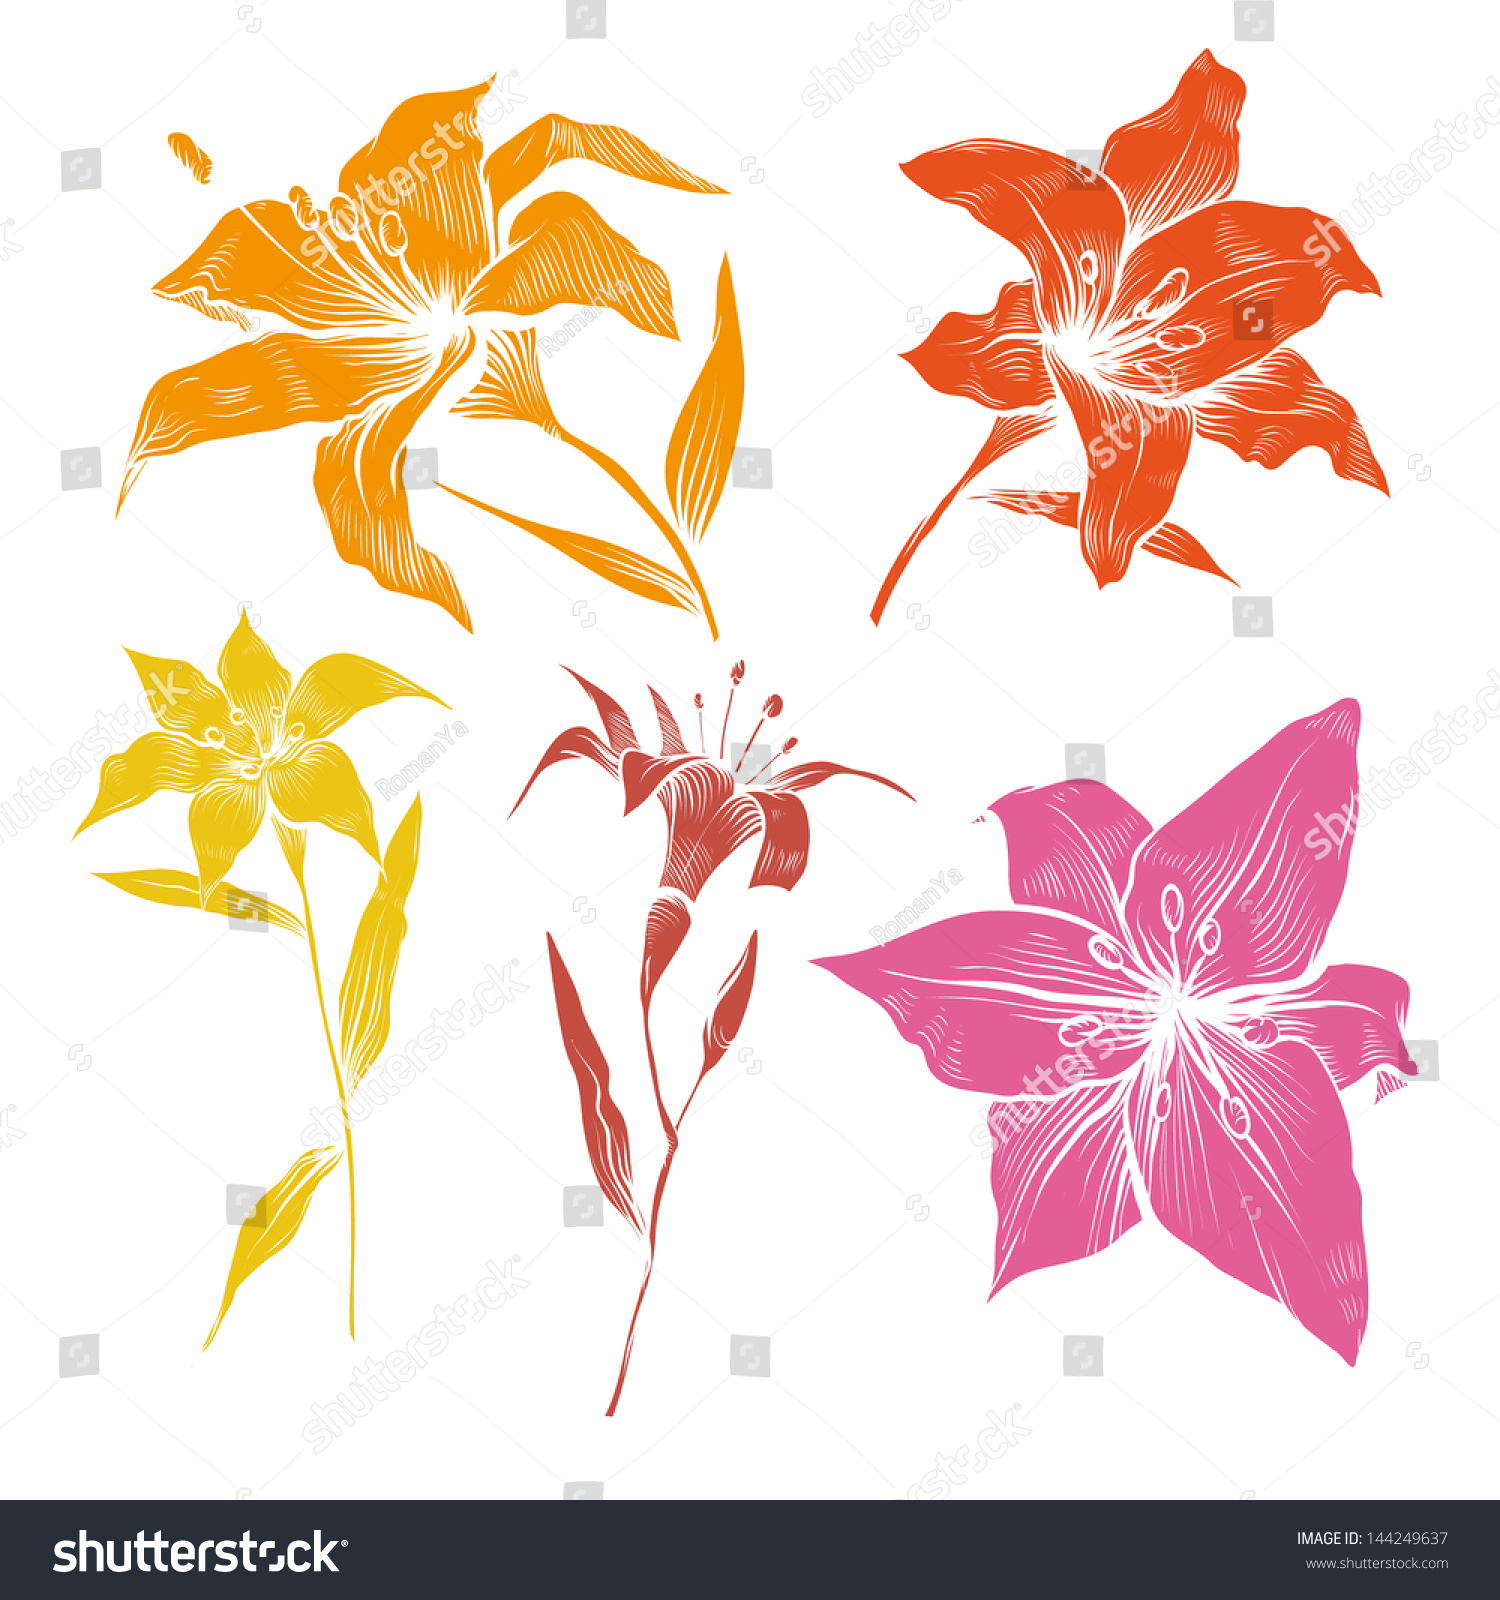 Hand Drawn Lilly Flowers Vector Set - 144249637 : Shutterstock